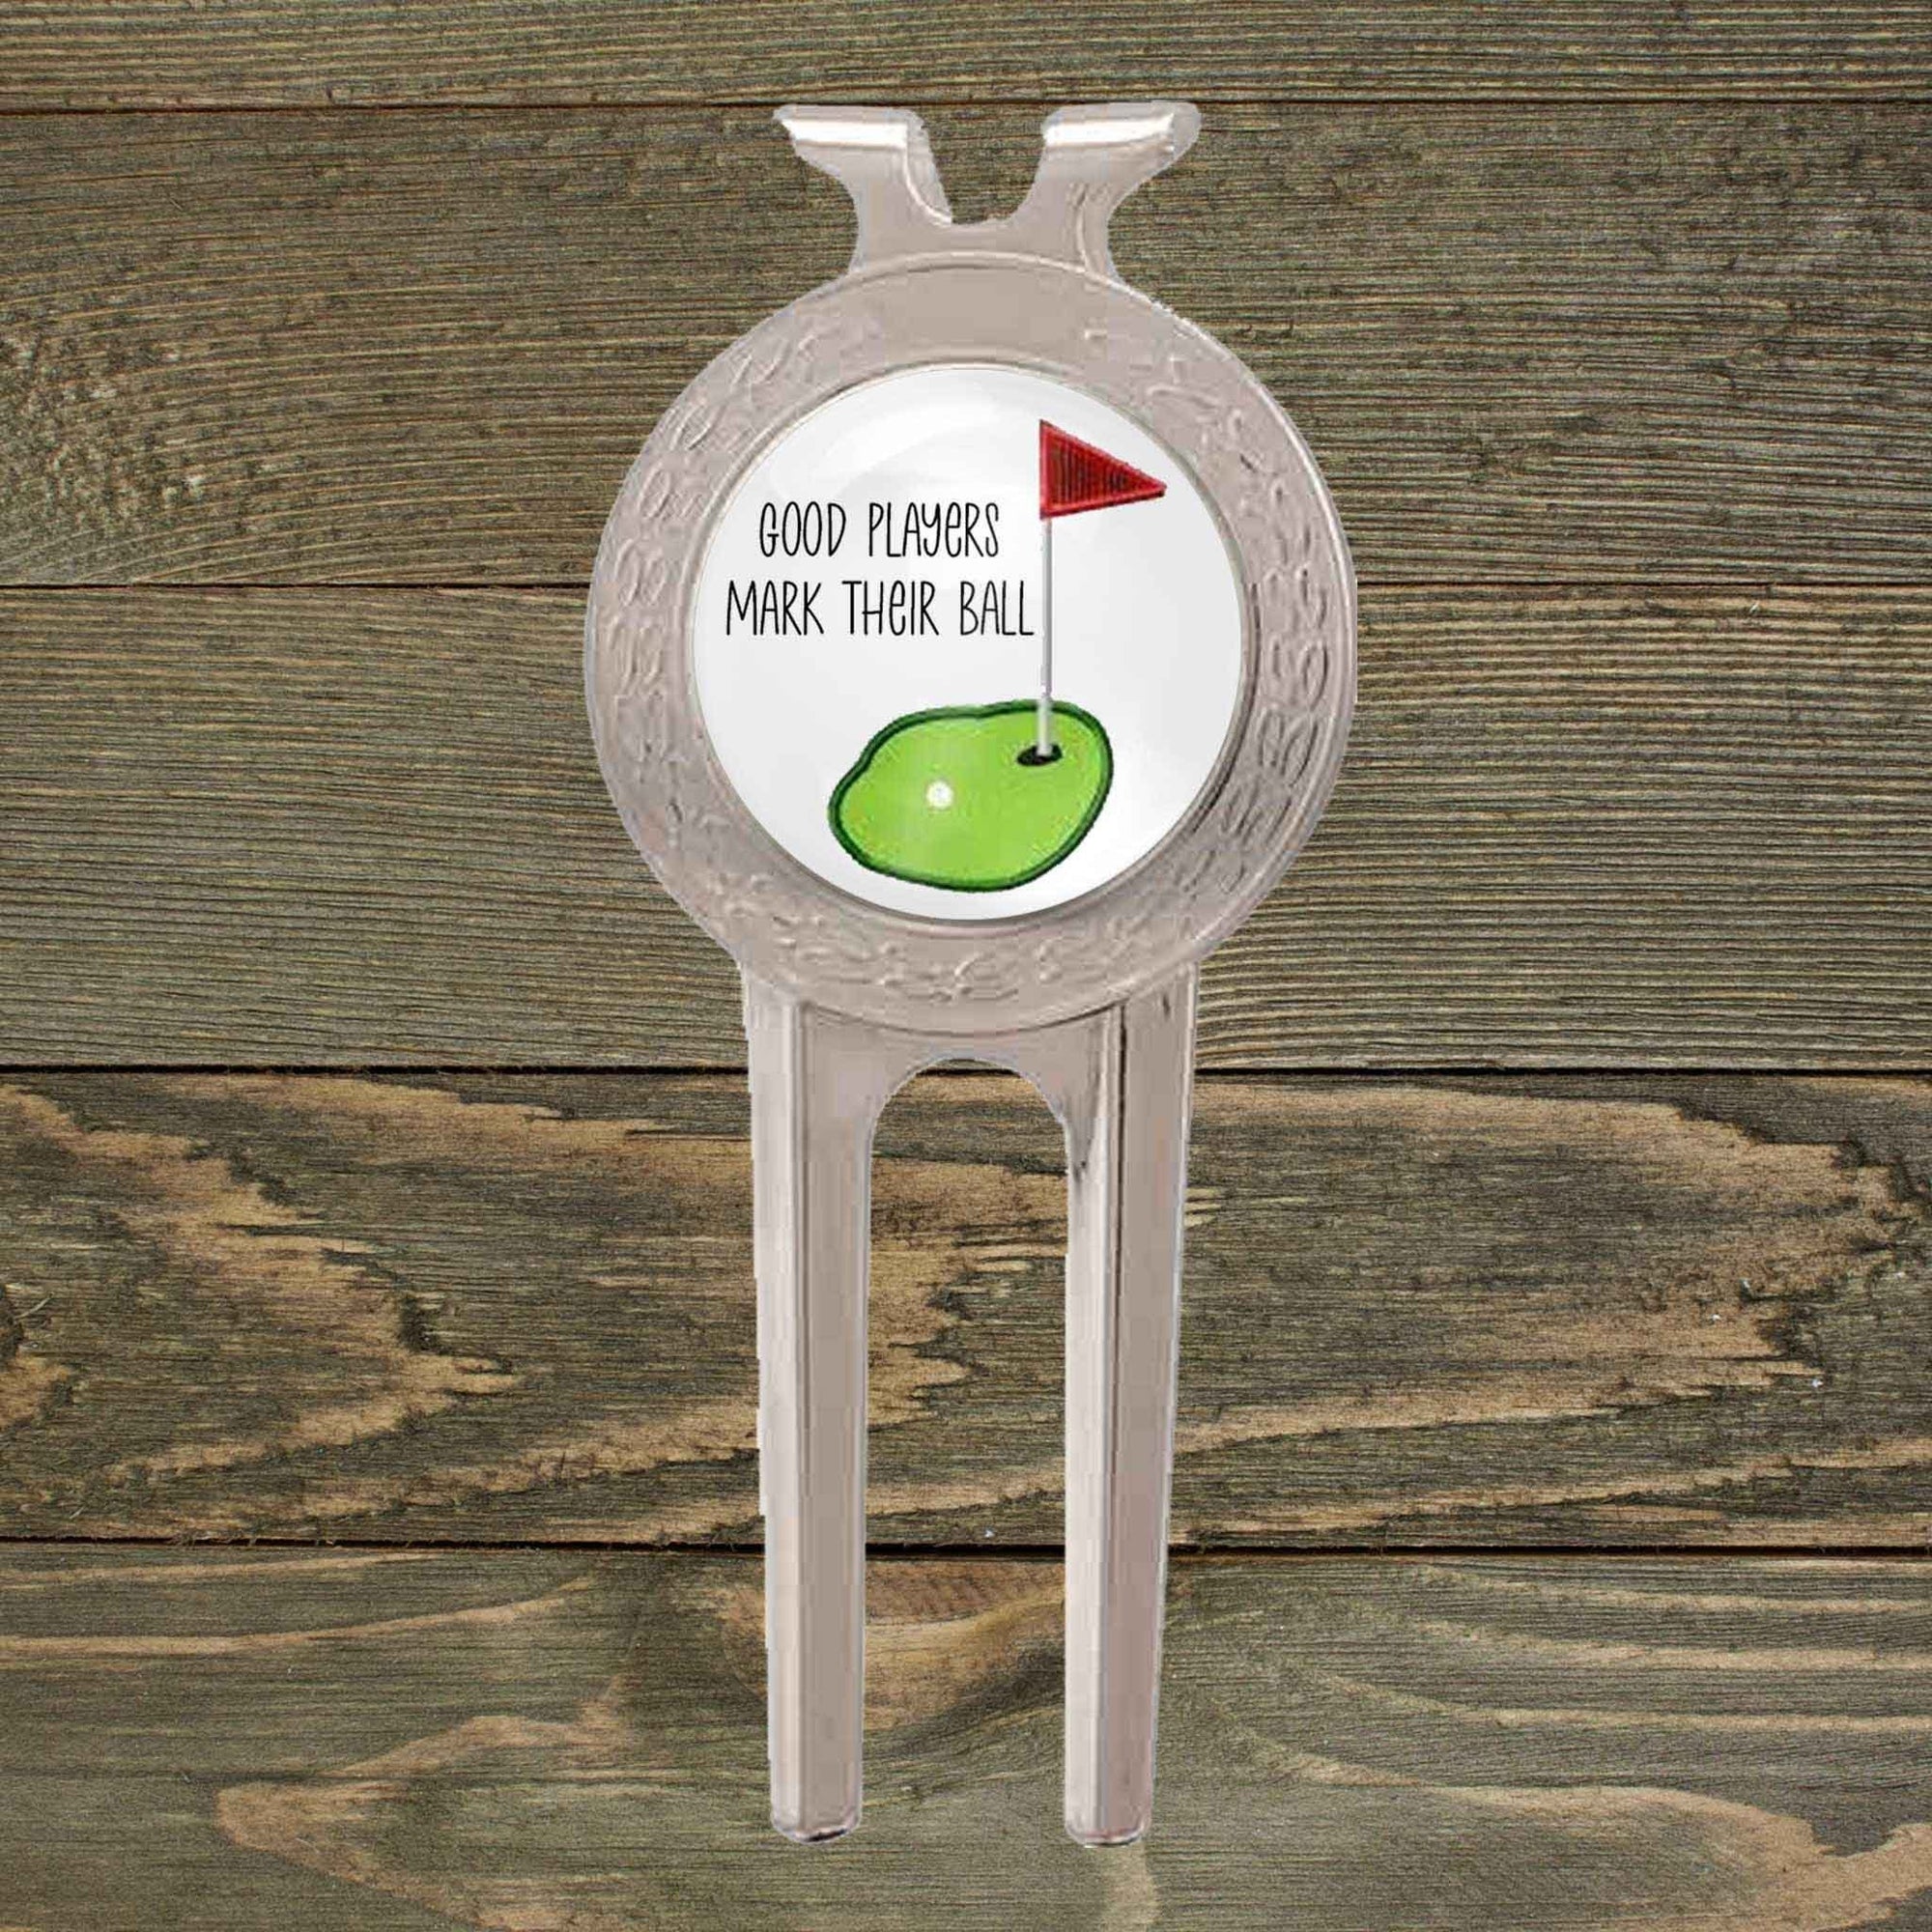 Personalized Divot Repair Tool | Golf Accessories | Golf Gifts | Good Players Mark Their Ball